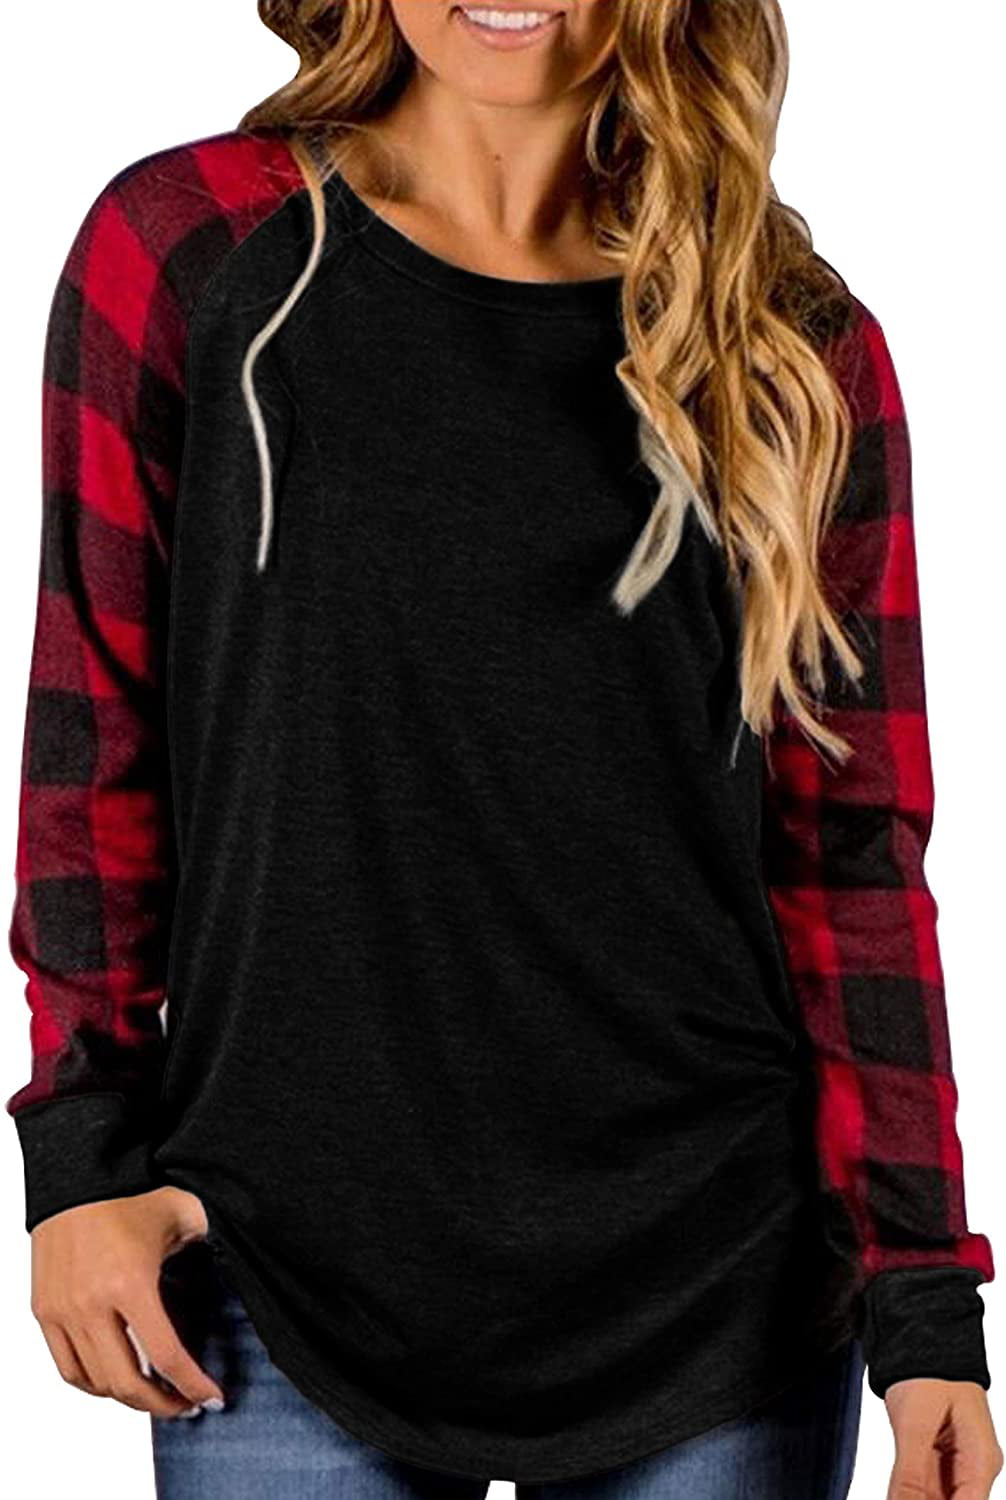 Red Buffalo Plaid Bear Mama Printed Toddler Childrens Crew Neck Sweater Long Sleeve Cute Knitted Jumper Top